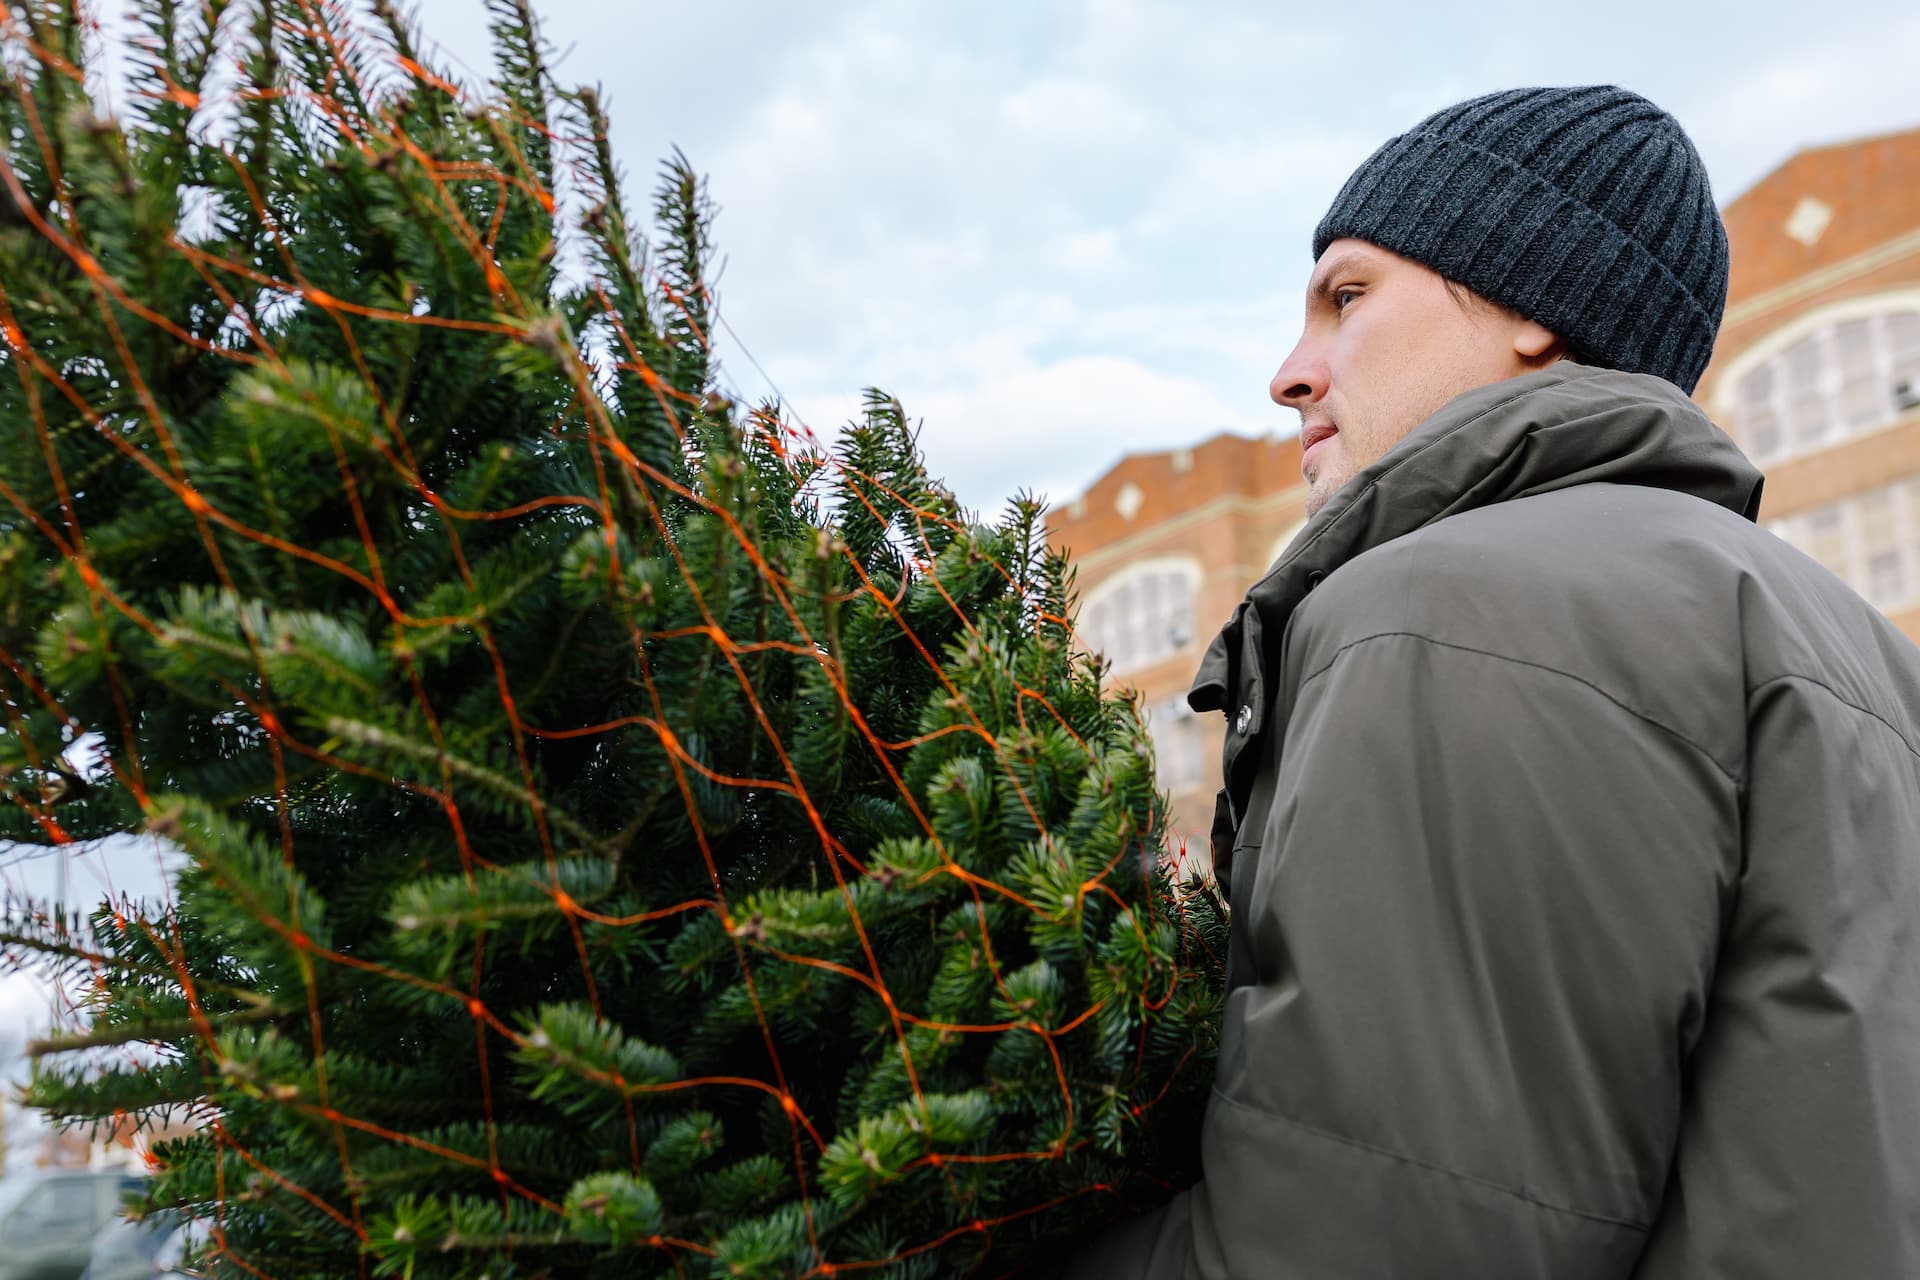 Where To Find A Christmas Tree Lot Near You In The Treasure Valley | Totally Boise